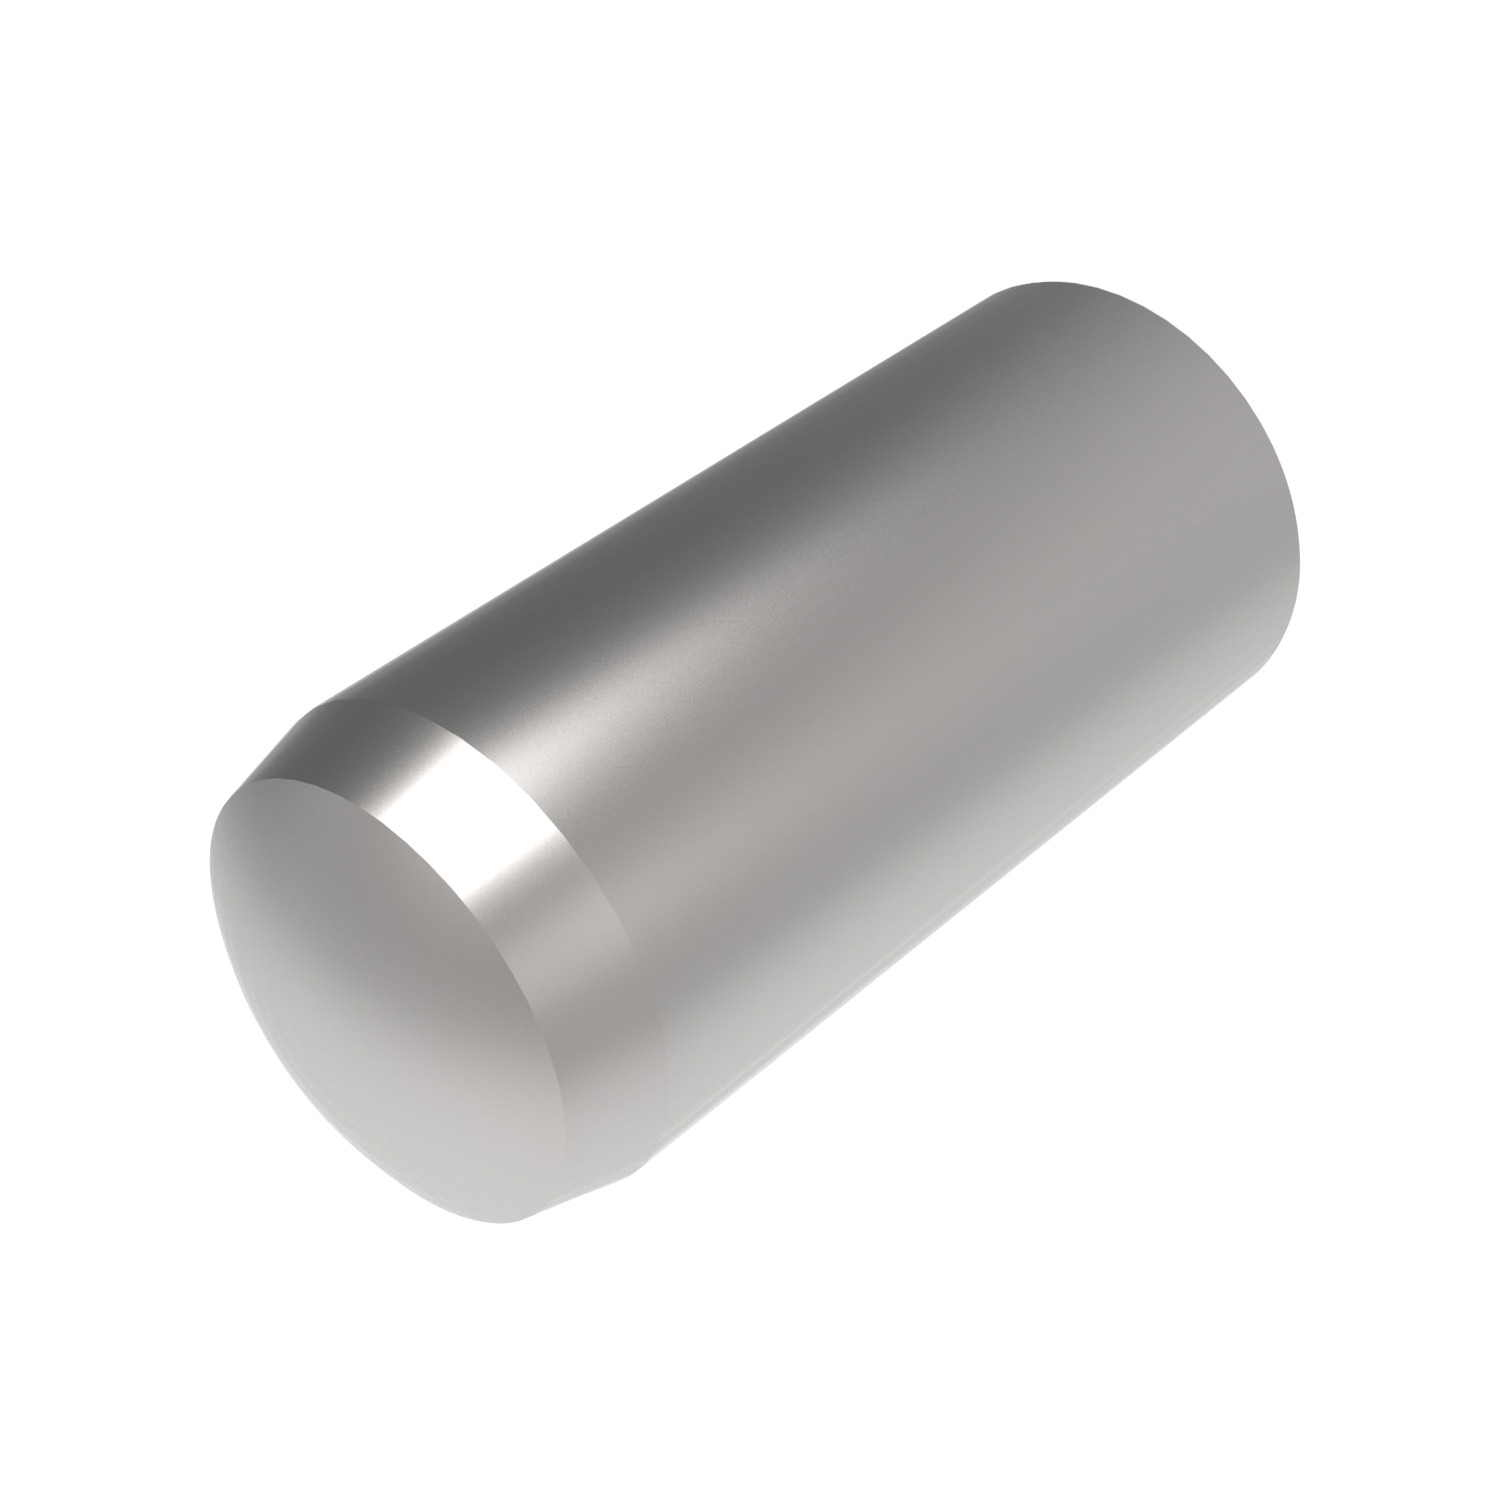 P1213 - Stainless Extractable Dowel Pins